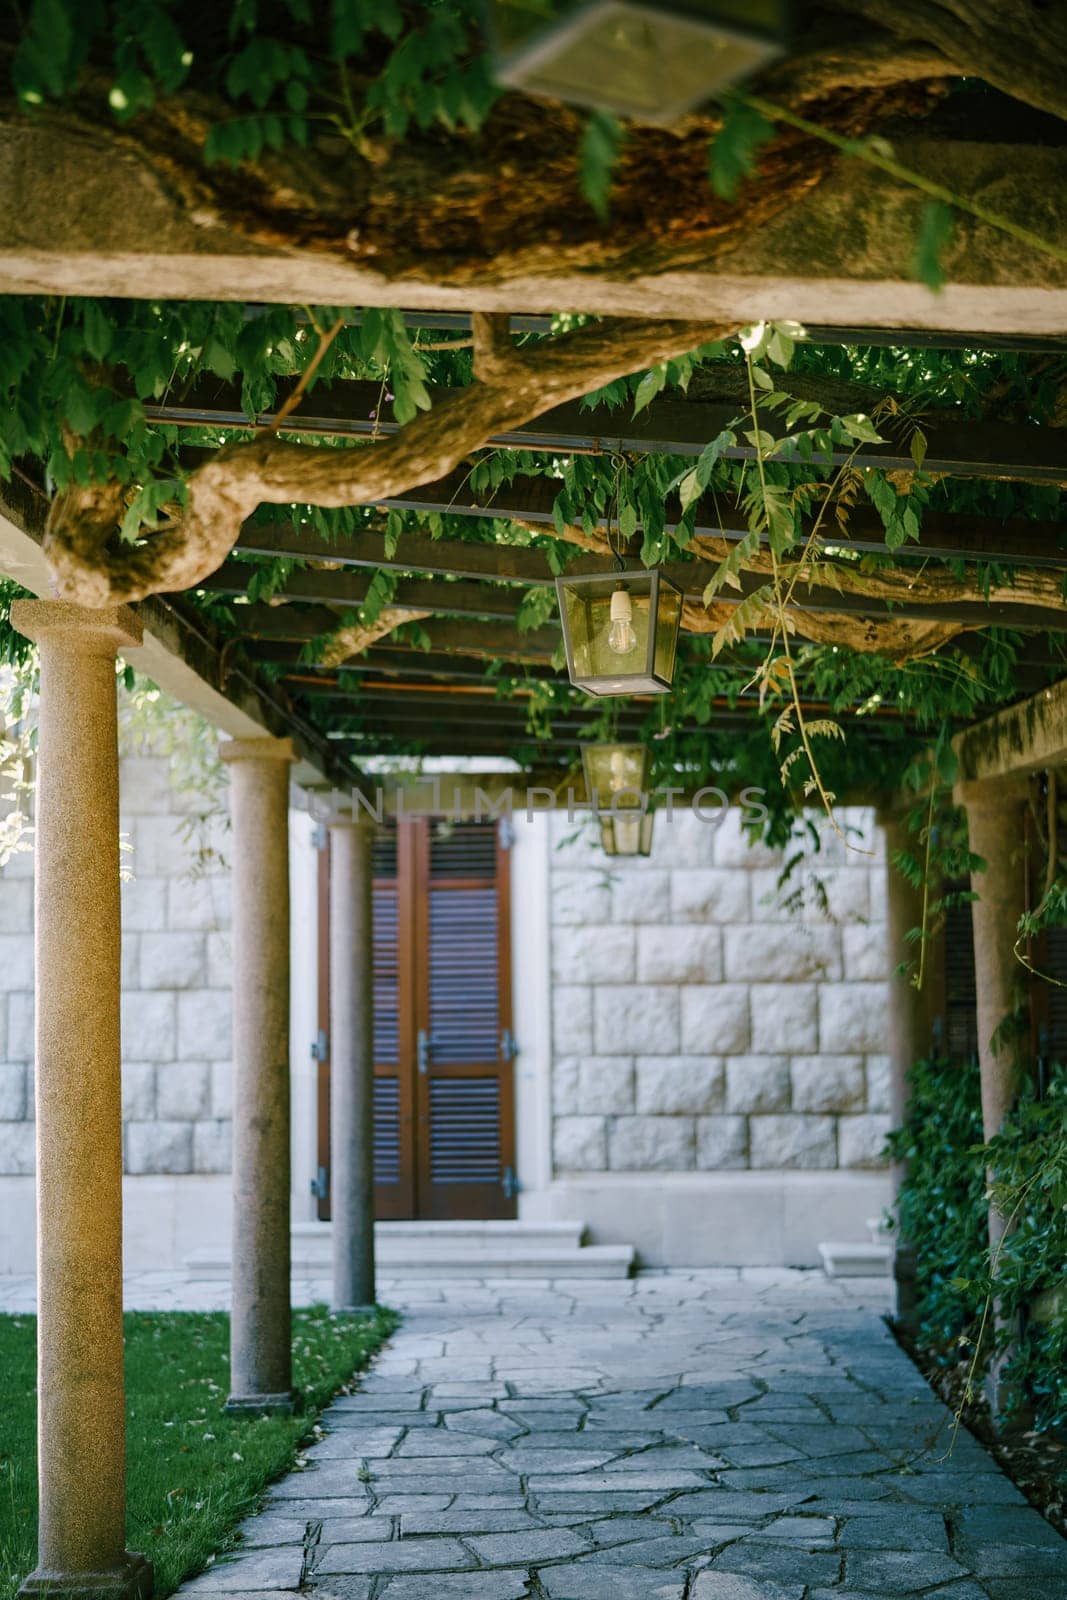 Yellow lanterns hang from the beams of a pergola entwined with green branches in the garden. High quality photo